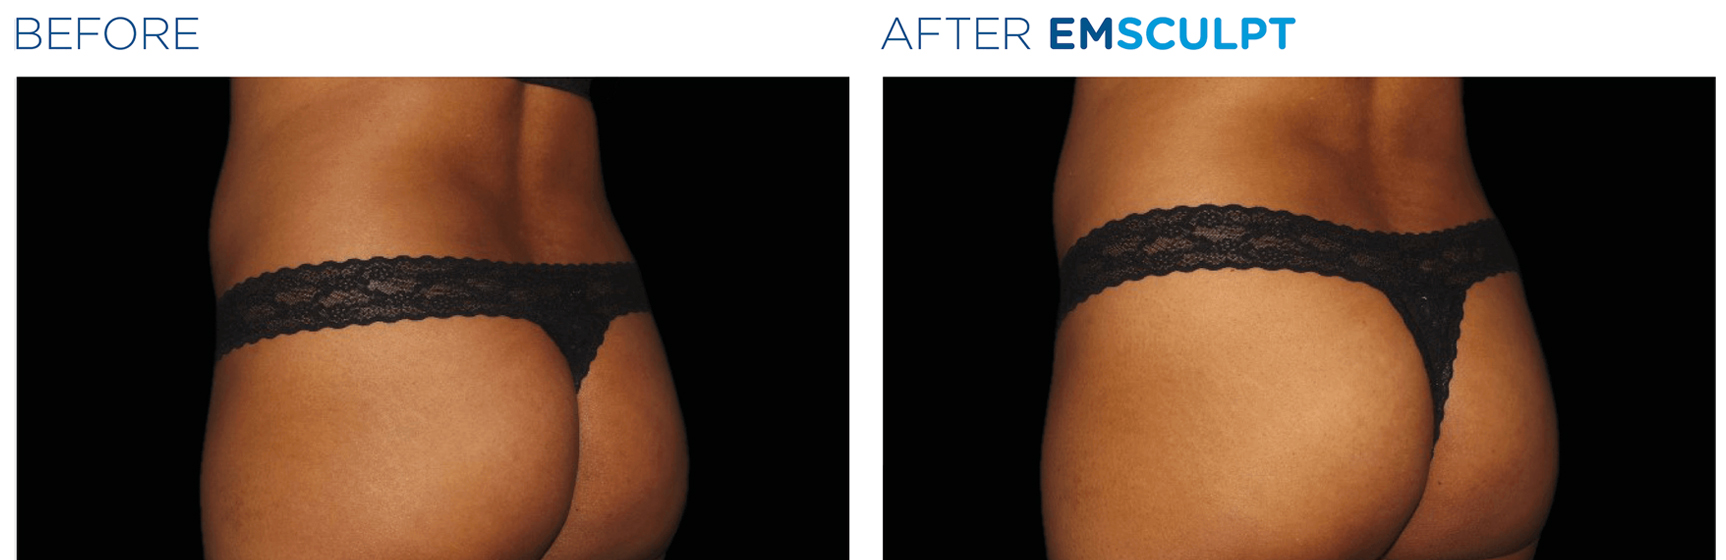 emsculpt before and after